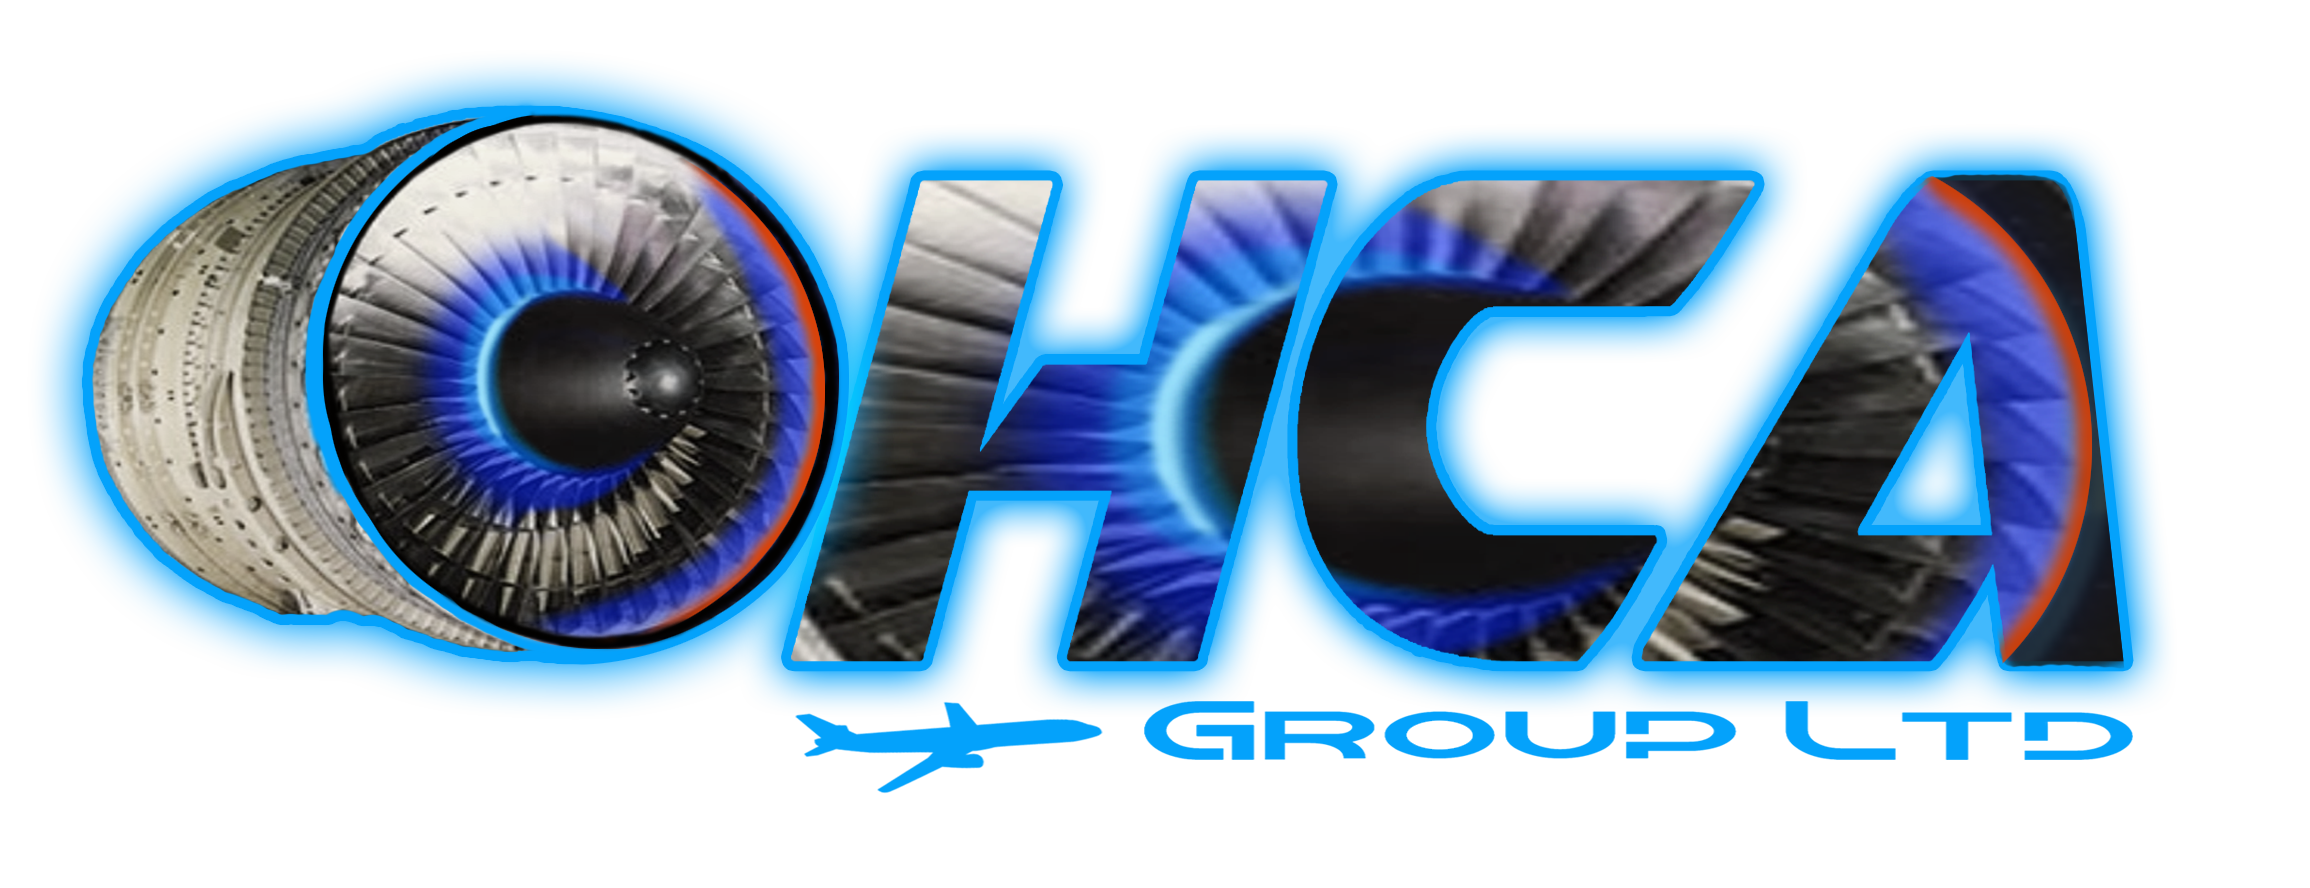 OHCA GROUP LTD IS A LEADER IN QUALITY CONTROL STANDARDS FOR AVIATION PRODUCTS